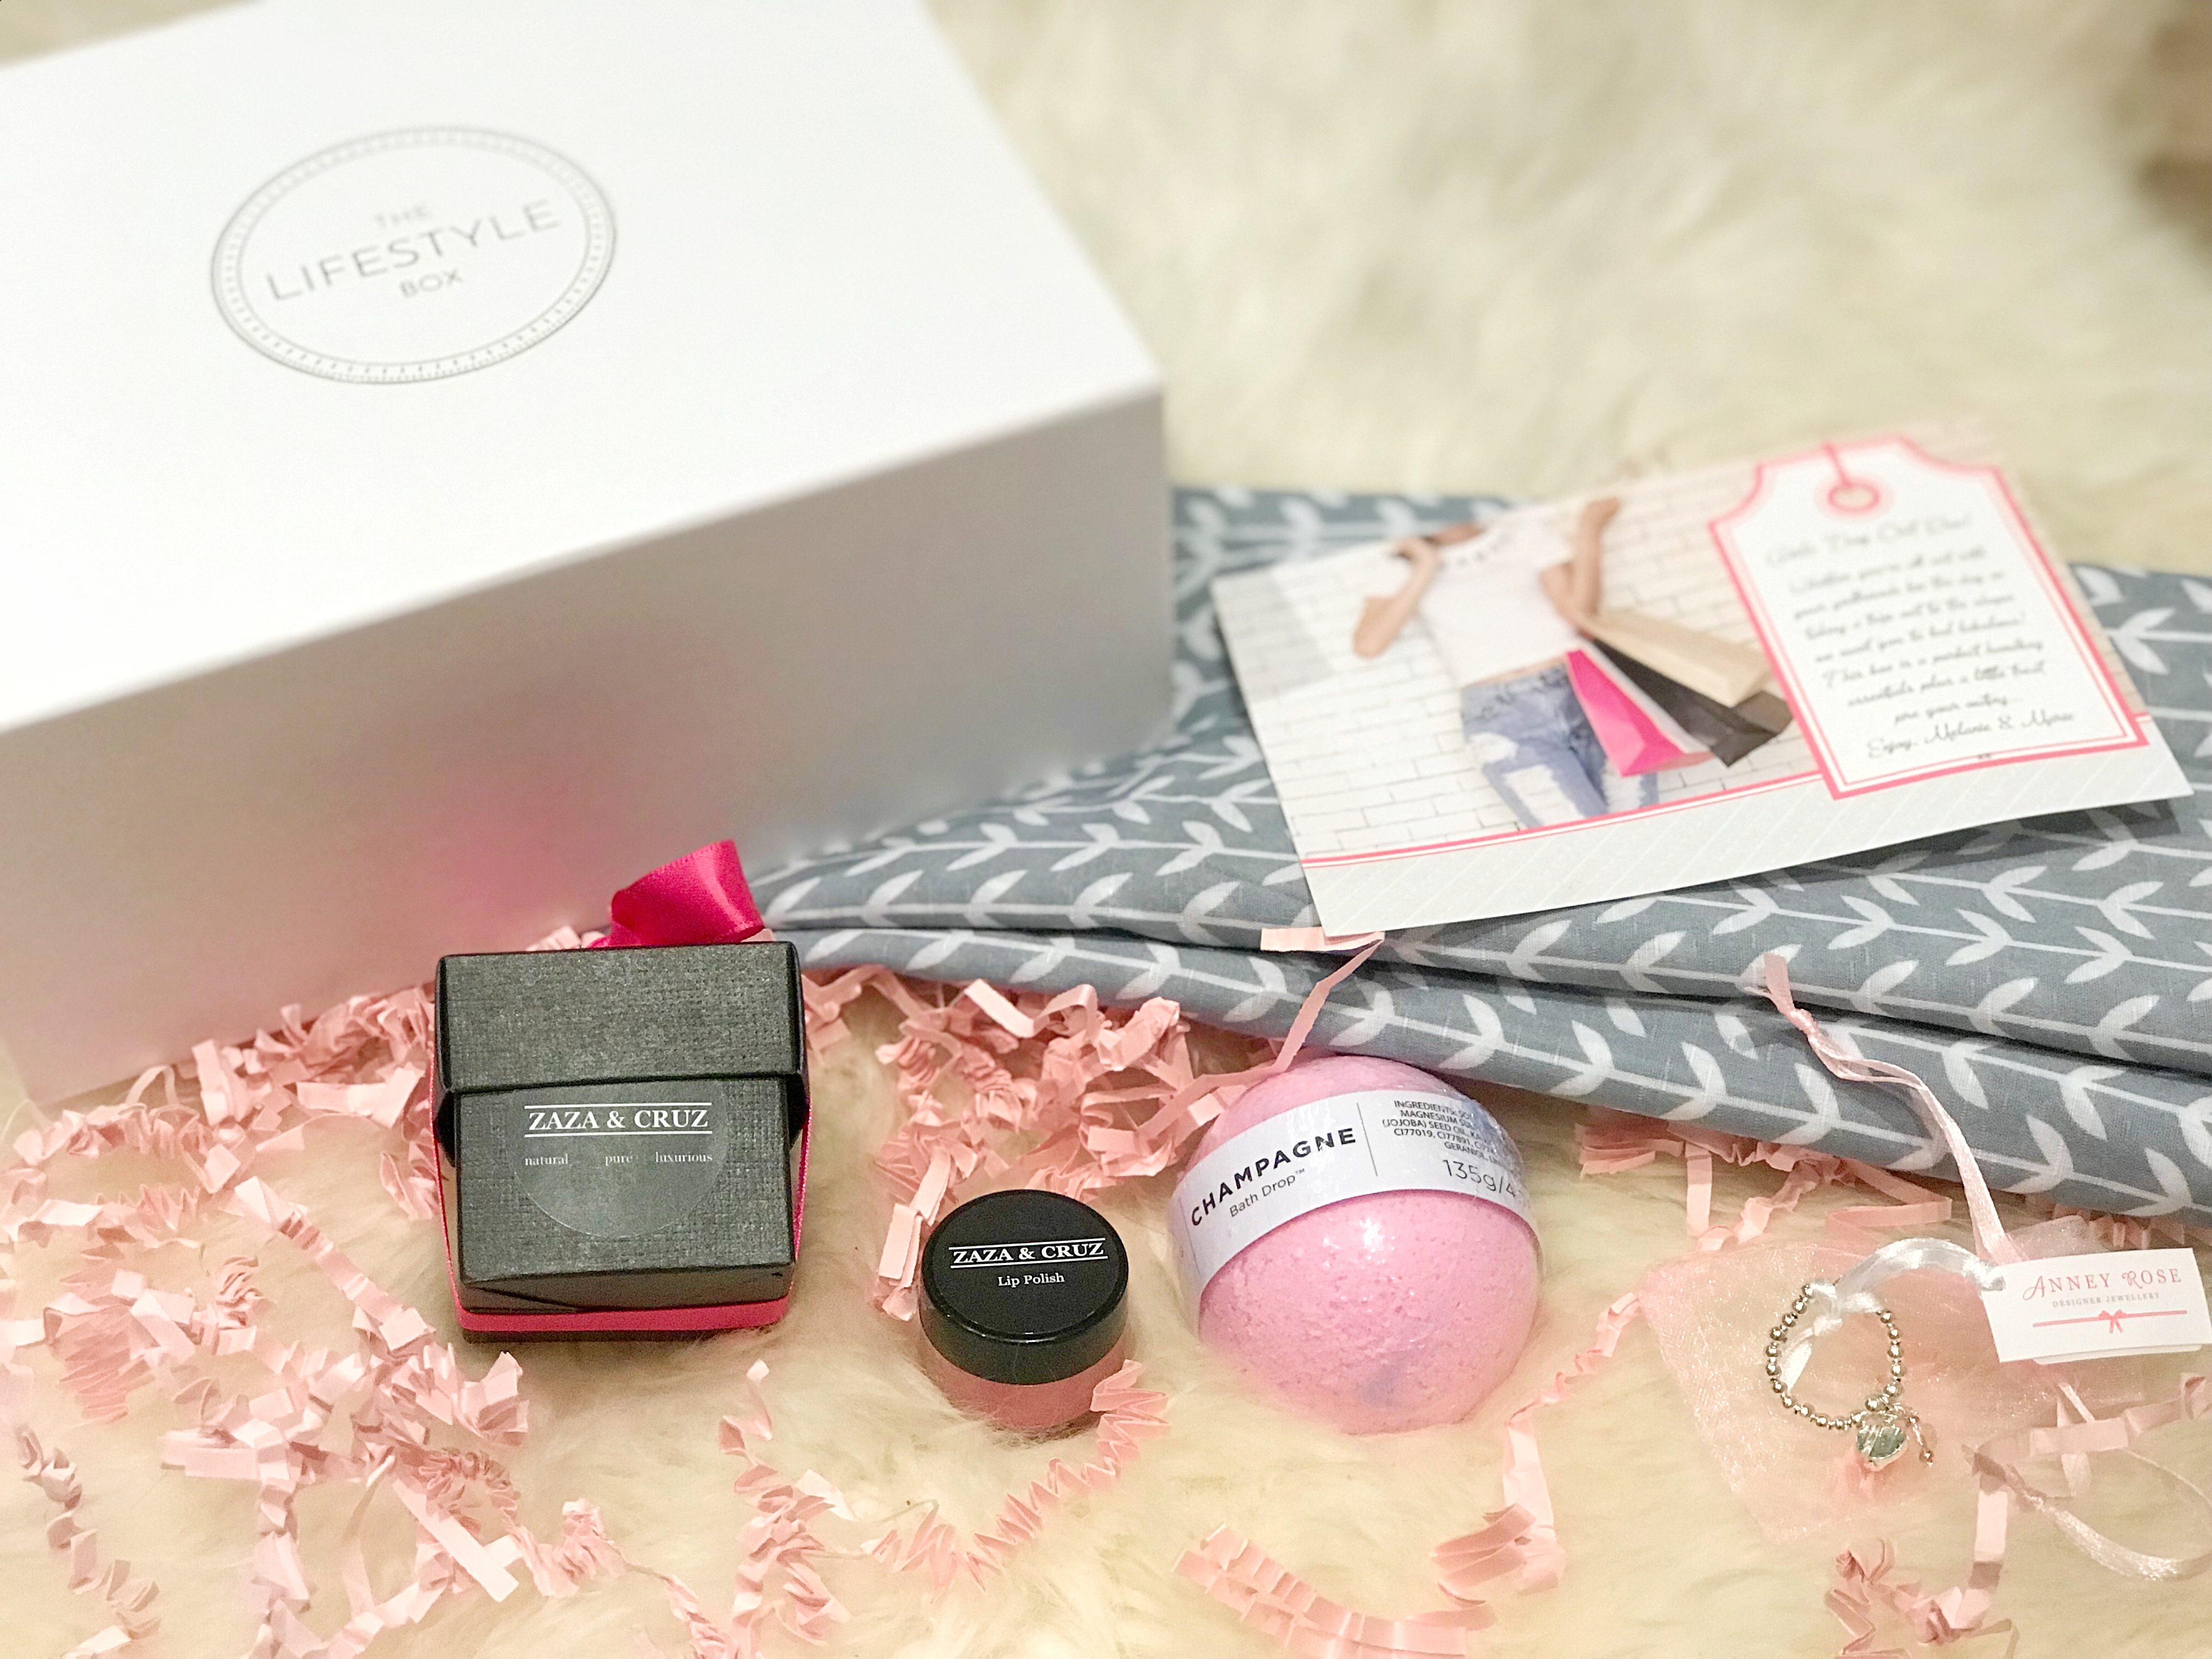 The Lifestyle subscription box self care items